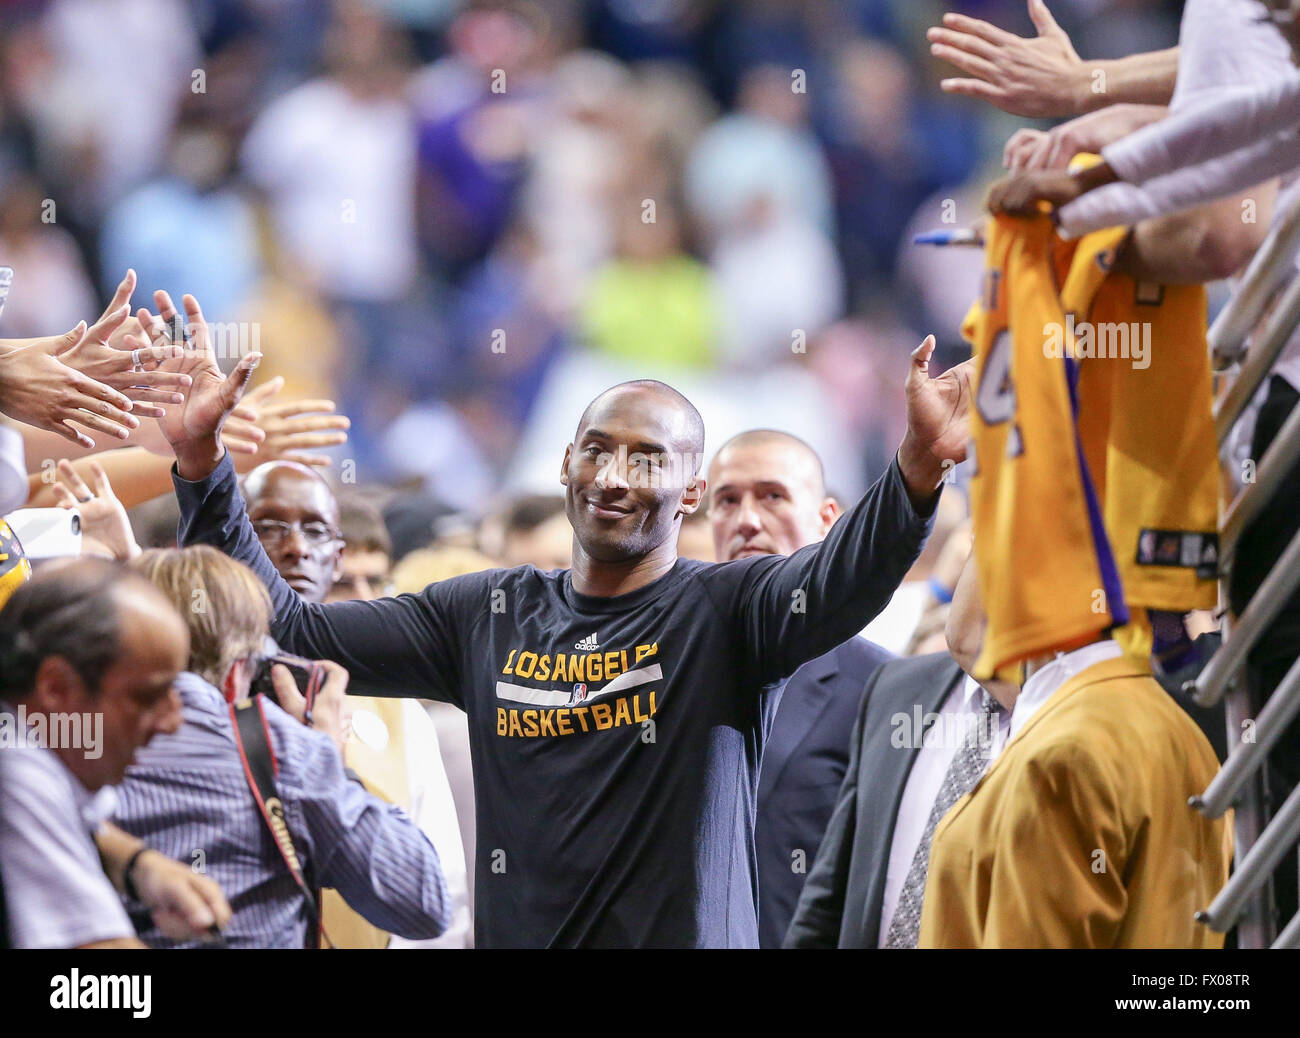 New Orleans, LA, USA. 08th Apr, 2016. Los Angeles Lakers forward Kobe Bryant (24) celebrating a great career with fans as he heads into the tunnel after an NBA basketball game between the Los Angeles Lakers and the New Orleans Pelicans at the Smoothie King Center in New Orleans, LA. Stephen Lew/CSM/Alamy Live News Stock Photo